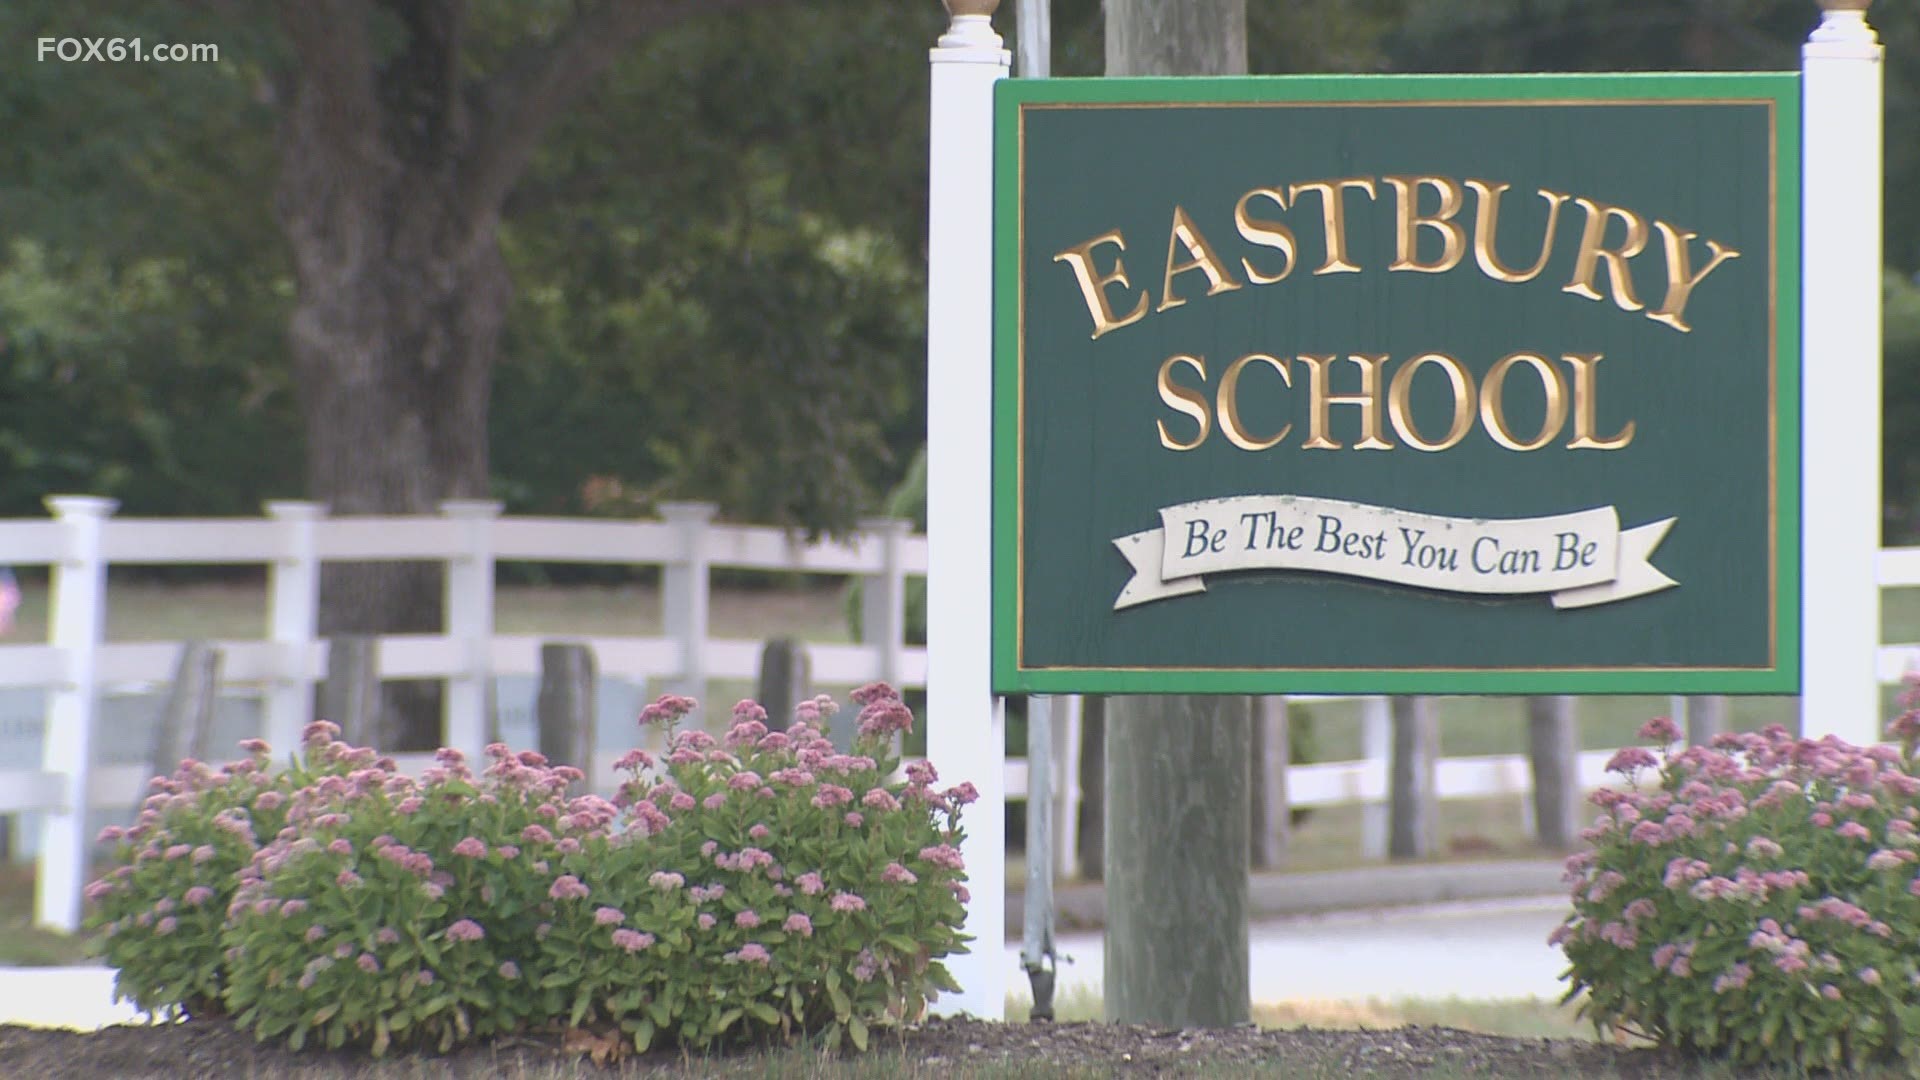 The early learning center at Eastbury was created to help provide teachers with a child care solution as they head back to the classroom.